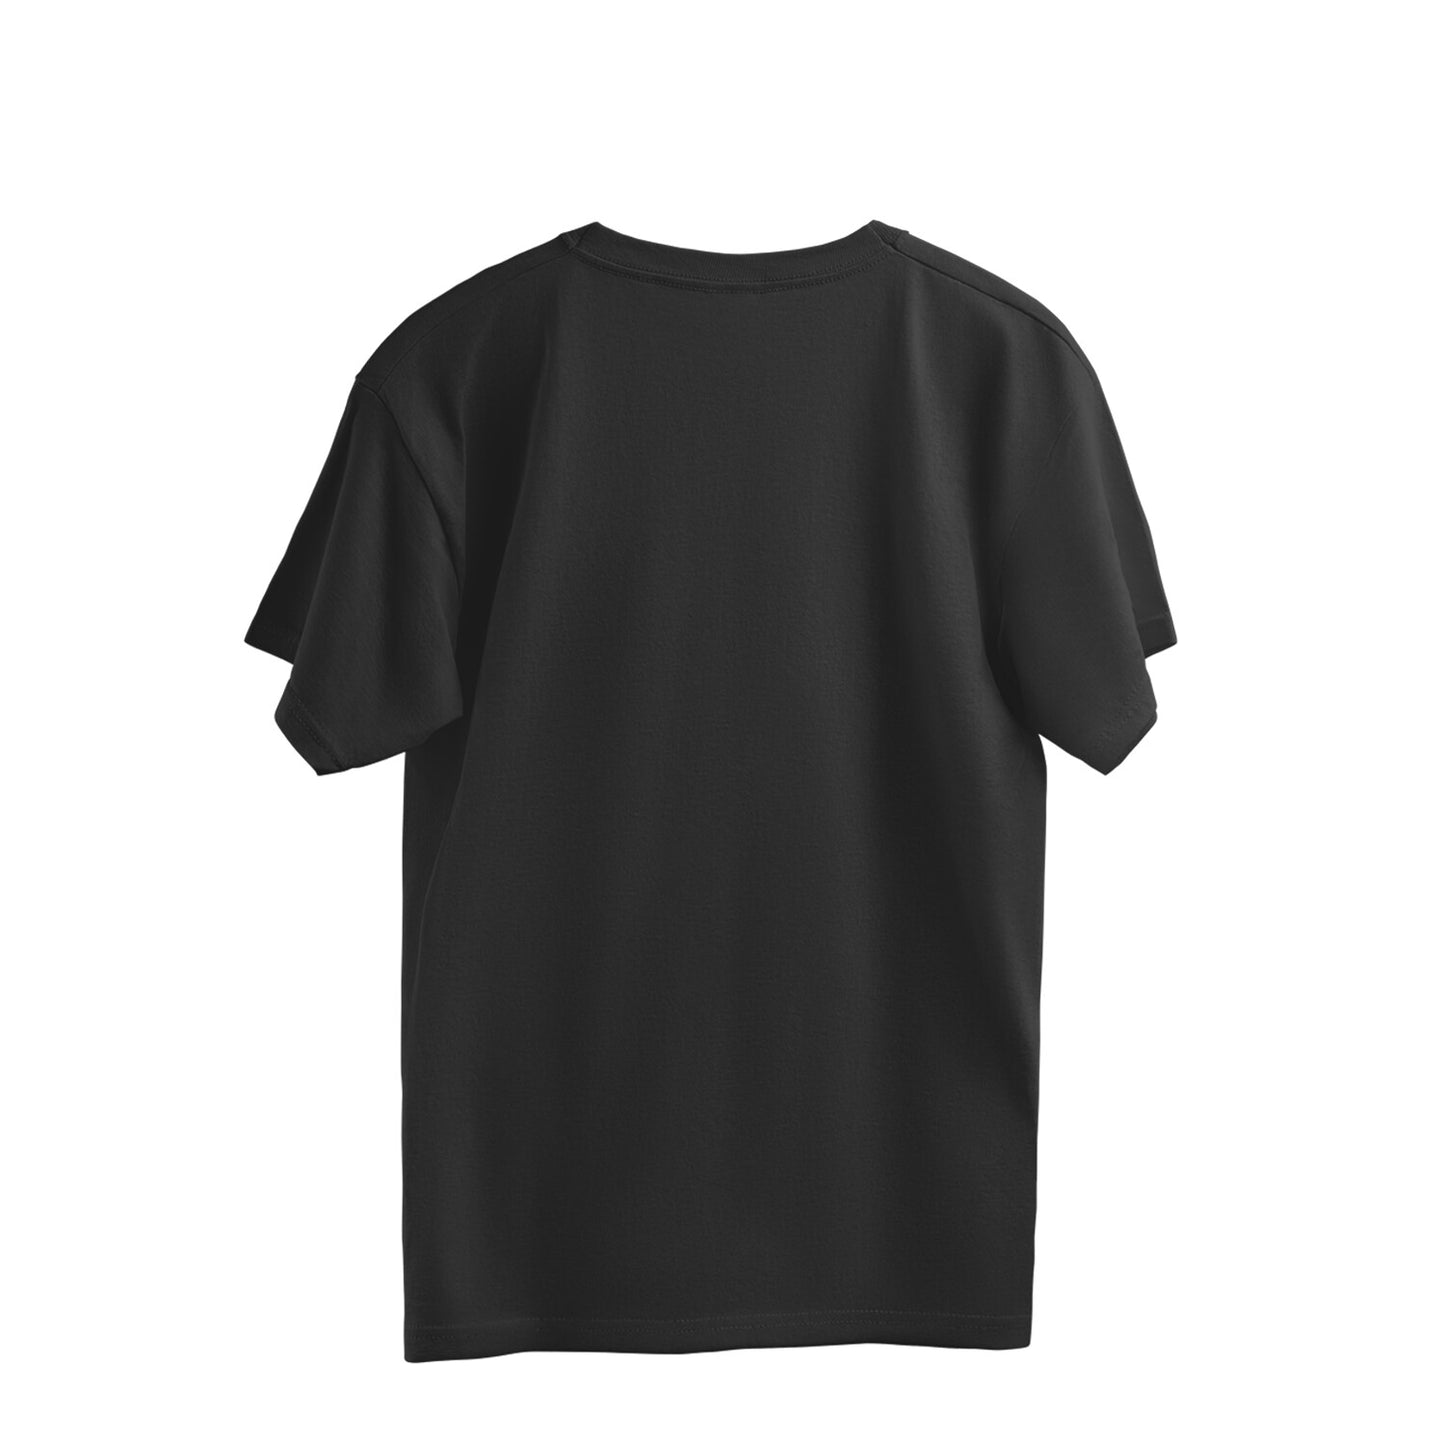 Awesome Oversized Men's T-Shirt